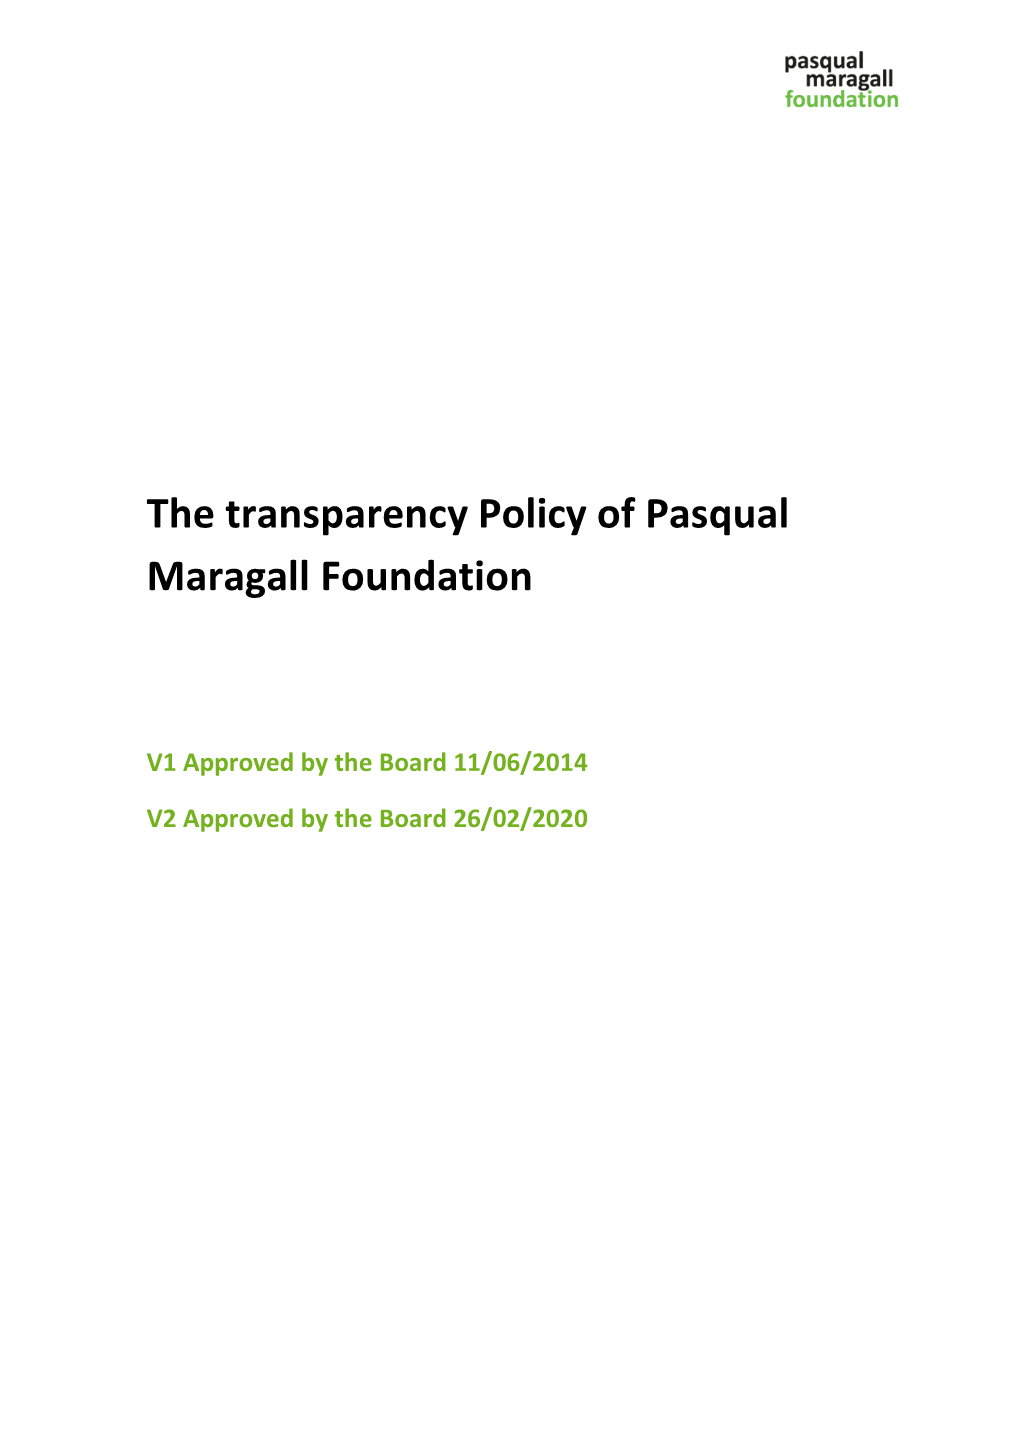 The Transparency Policy of Pasqual Maragall Foundation